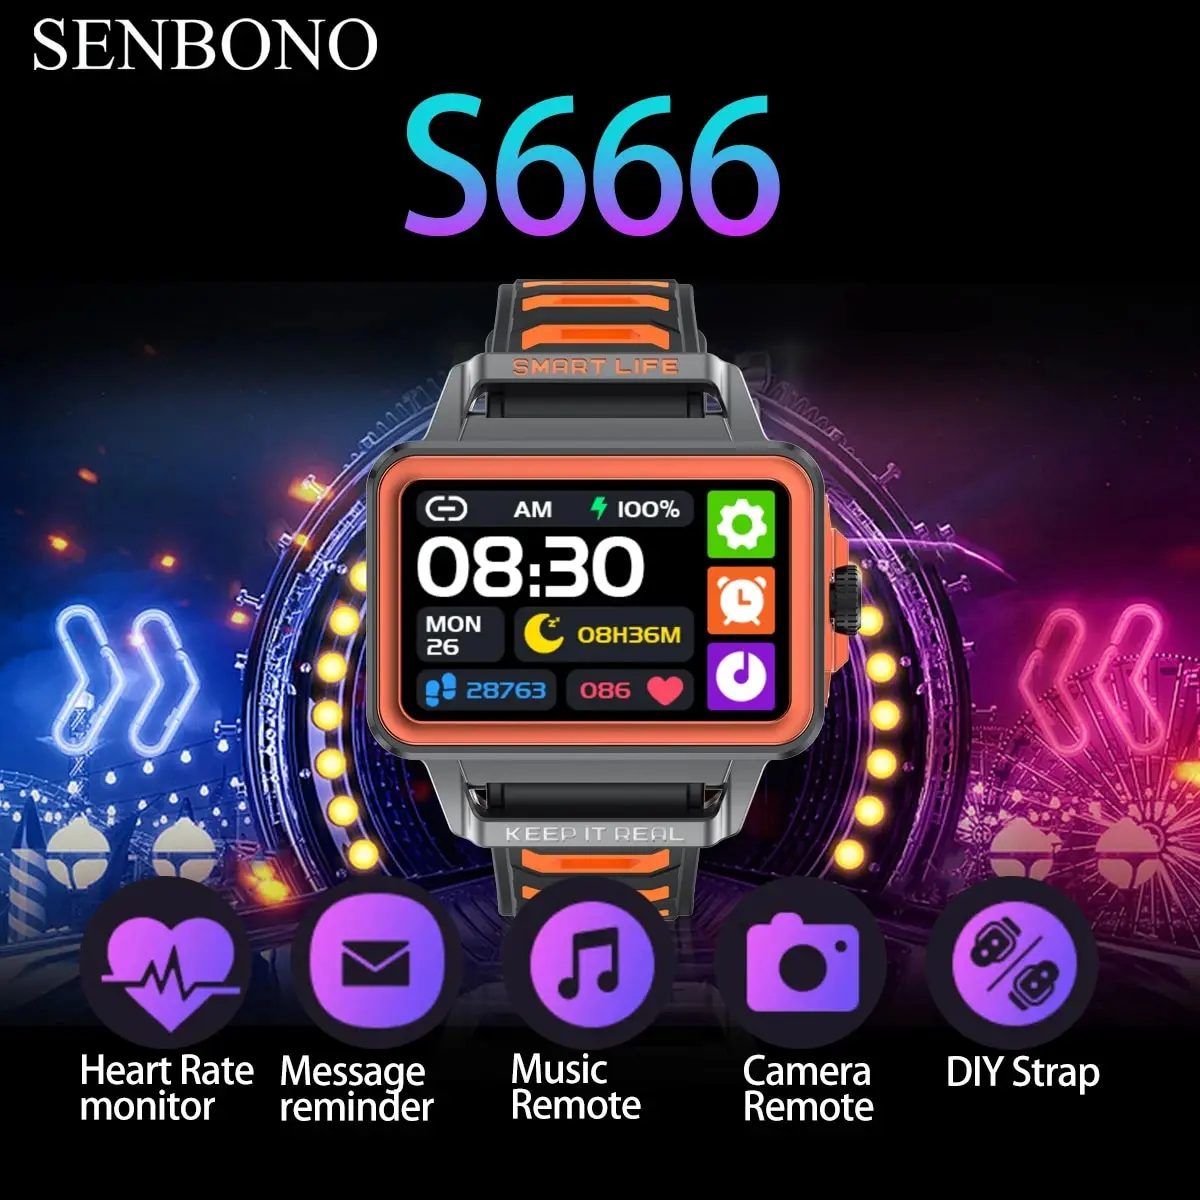 SENBONO NEW S666 Smart Watch for Men Women Call Reminder Heart Rate Monitor Waterproof Bracelet Sport Smartwatch for IOS Android